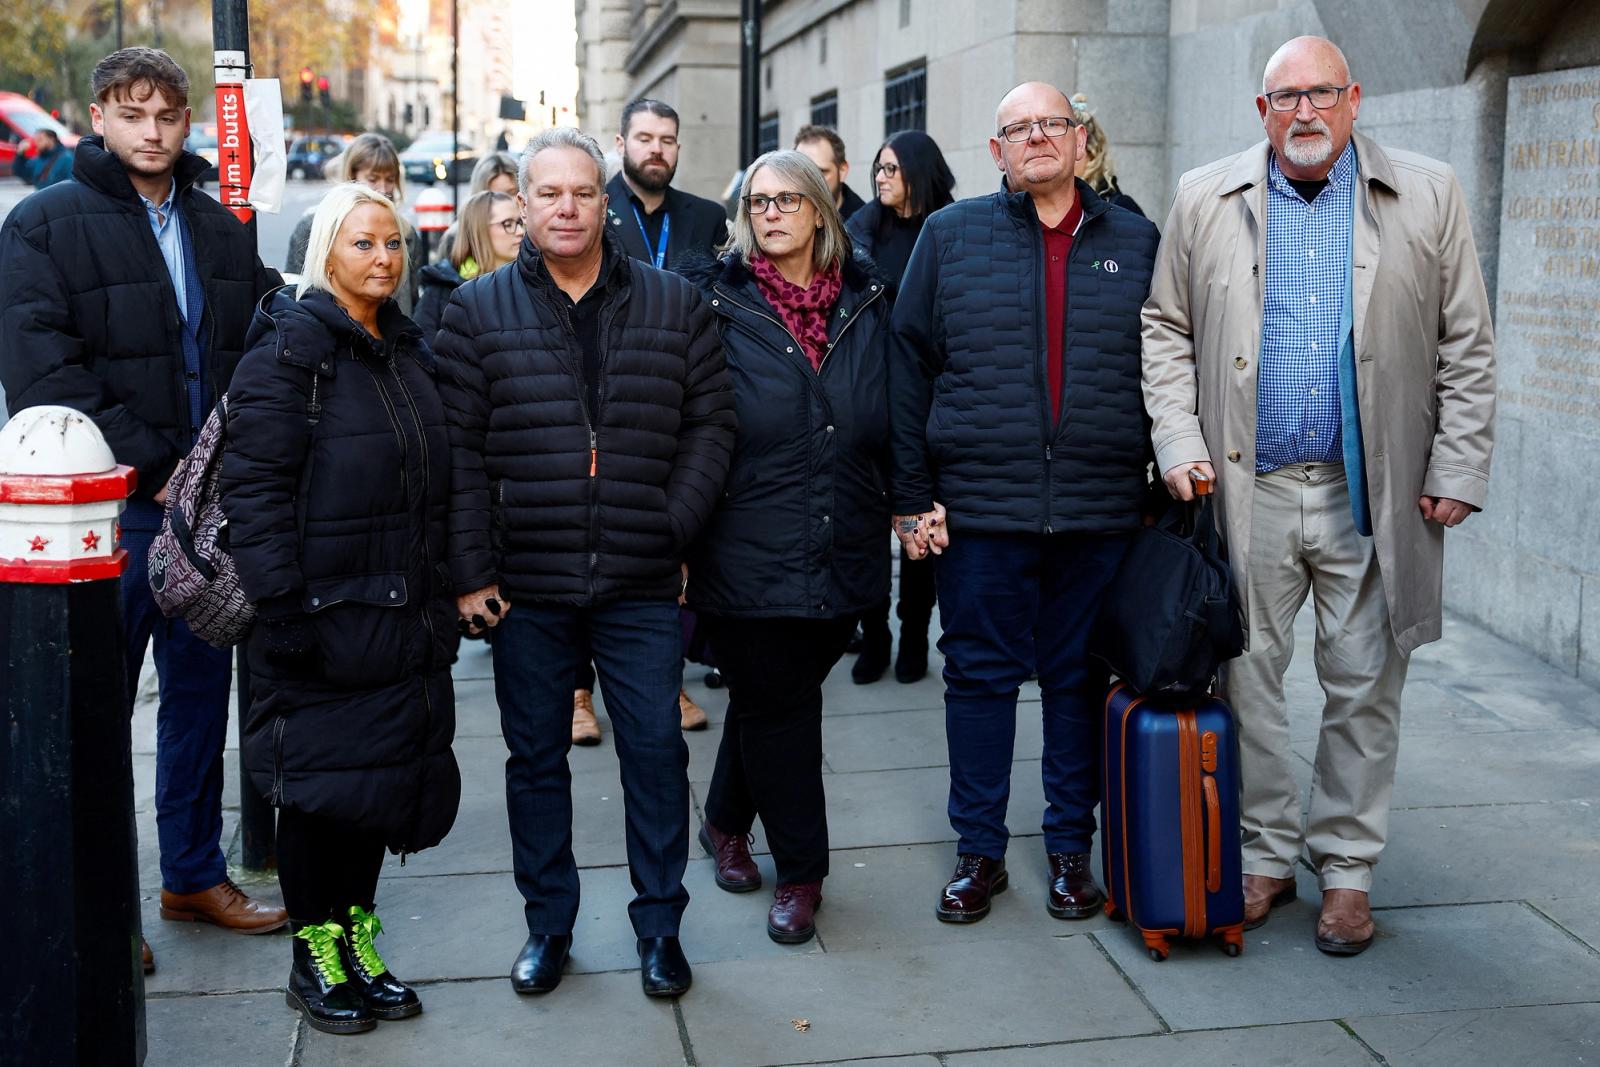 Harry Dunn's mother, Charlotte Charles and her husband Bruce stand with Harry Dunn's father, Tim Dunn, his partner Tracey and Radd Seiger, their adviser and spokesperson, as they attend the Old Bailey for the sentencing of Anne Sacoolas, the wife of a U.S. diplomat, over the death of Harry Dunn in a road traffic collision, in London, Britain, December 8, 2022.